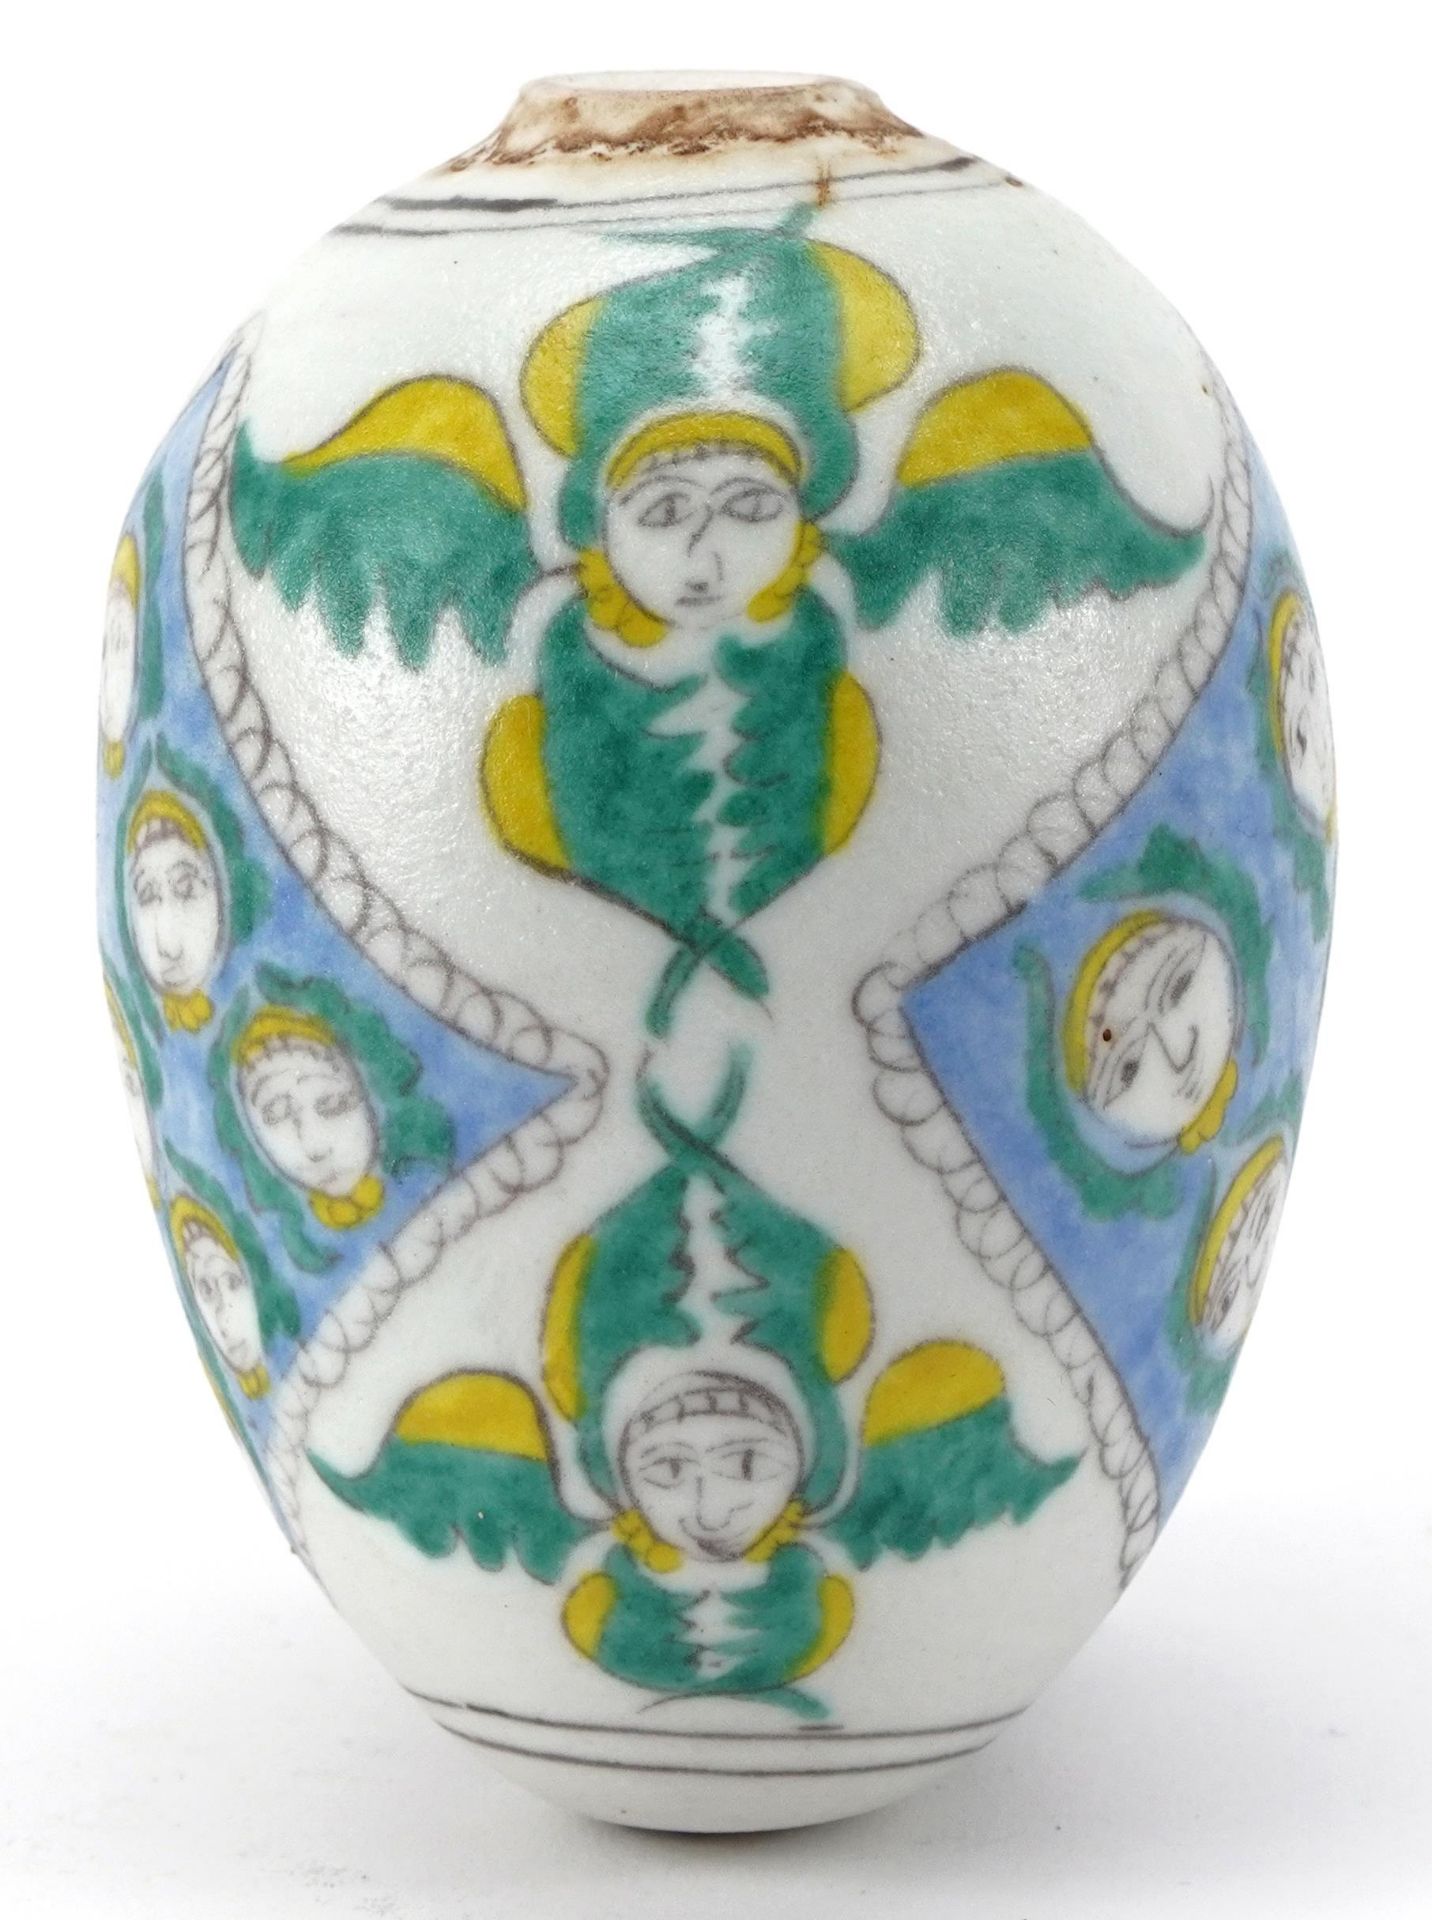 Turkish Armenian pottery hanging ball hand painted with mythical faces, 10cm high